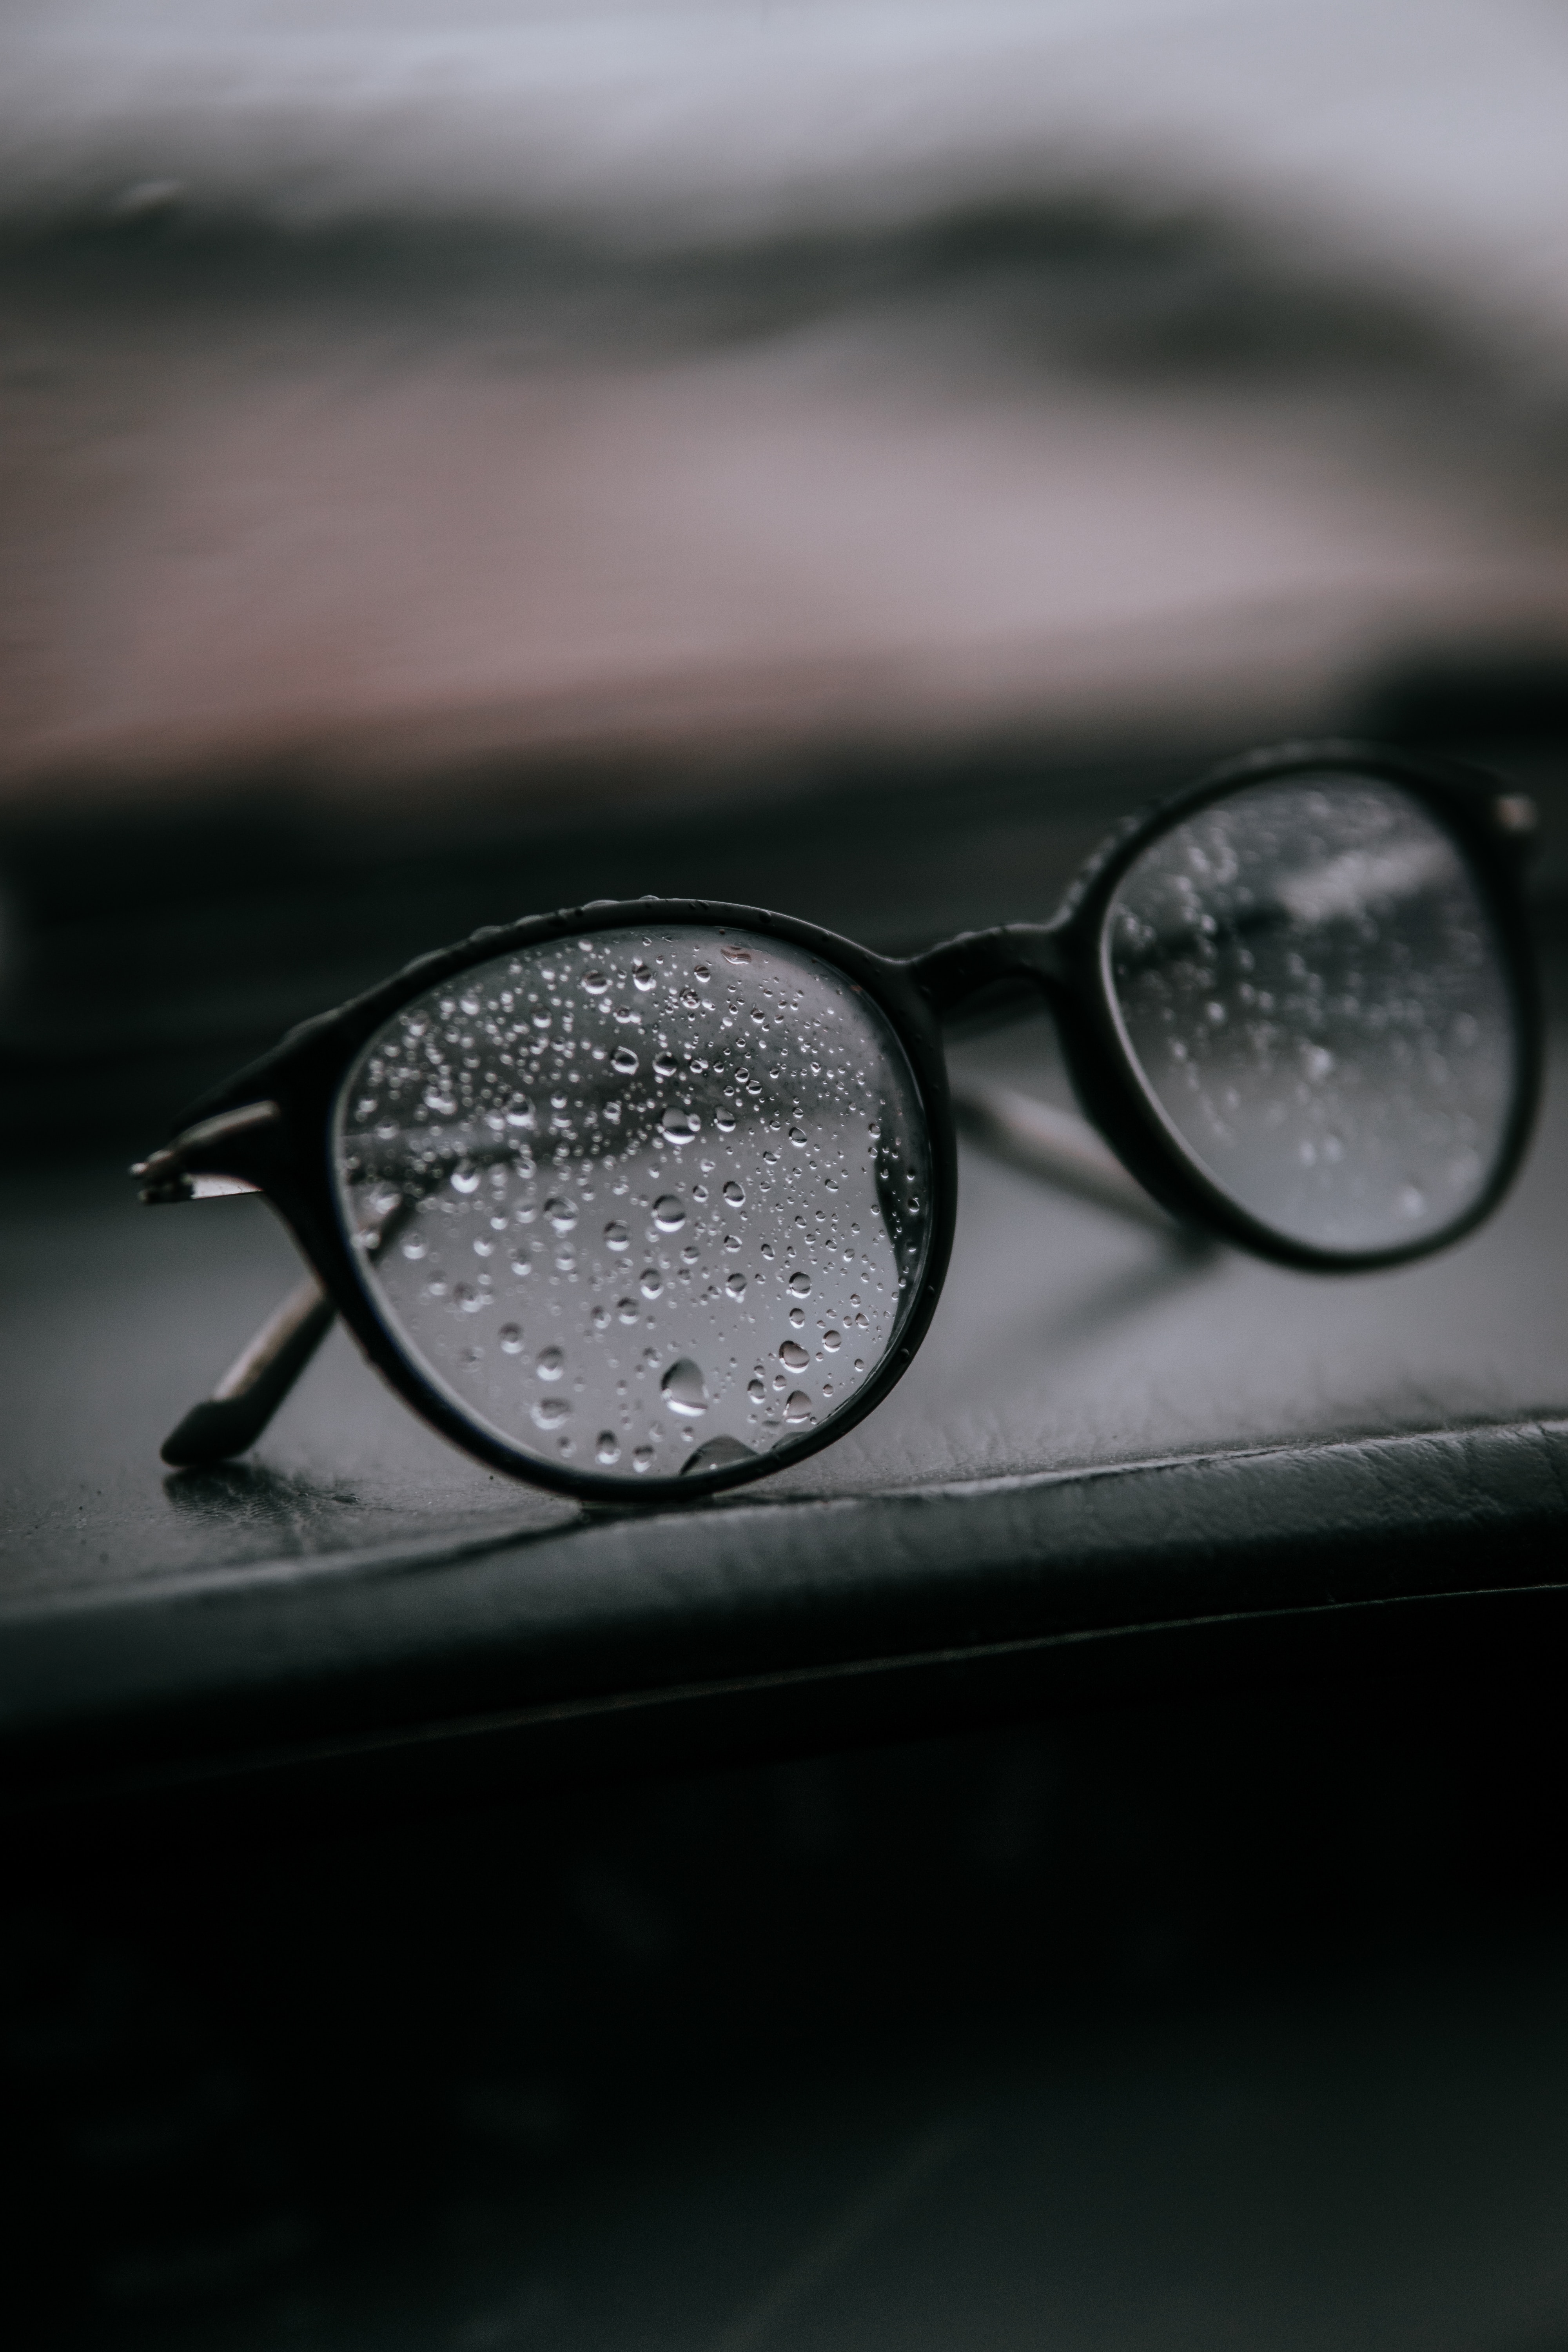 wallpapers miscellanea, drops, miscellaneous, wet, glass, glasses, spectacles